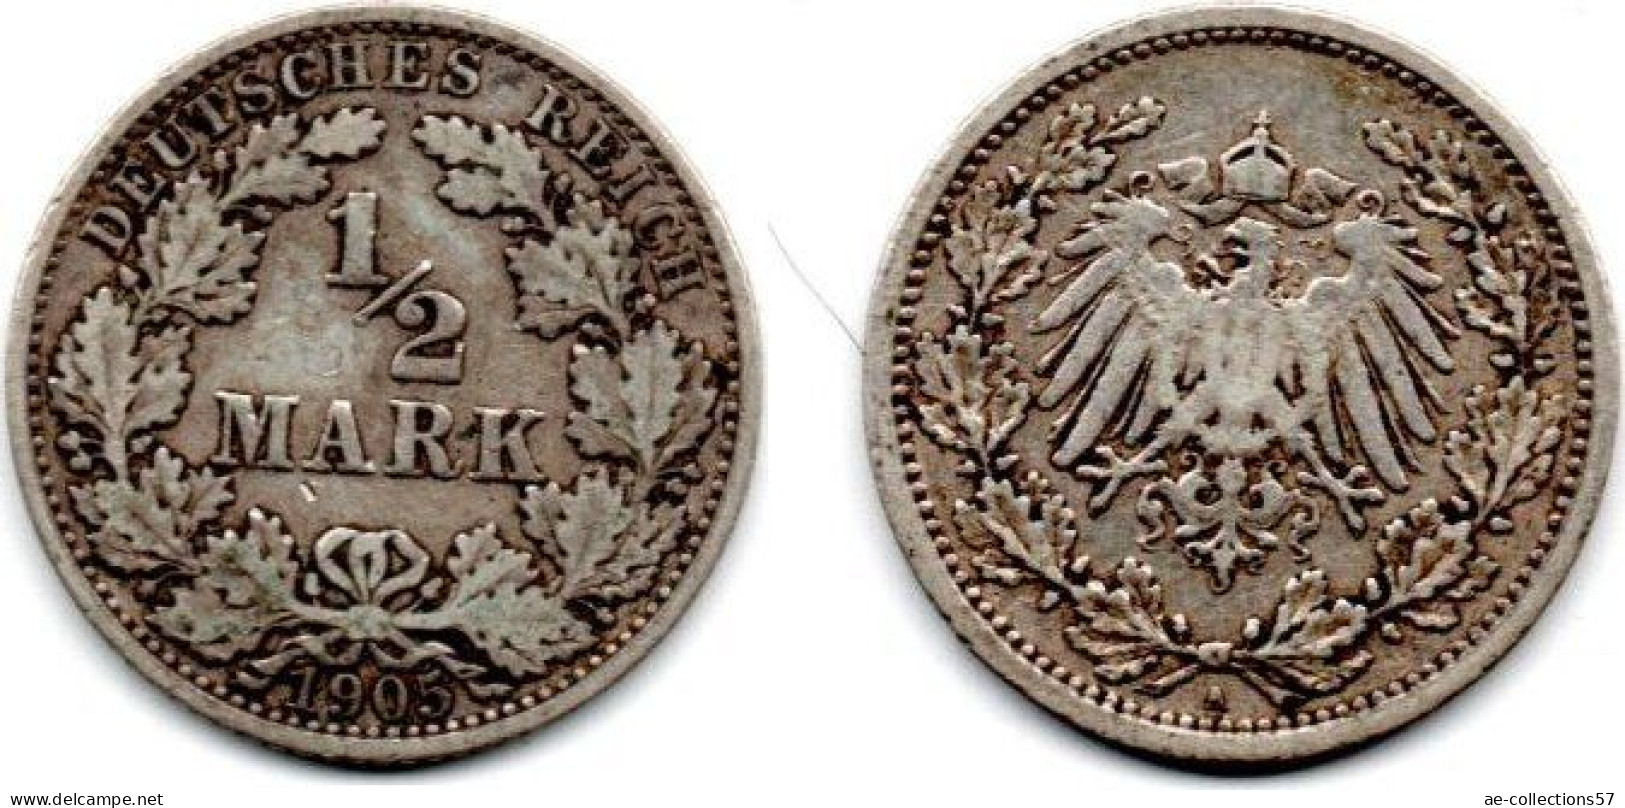 MA 29374 / Allemagne - Deutschland - Germany 1/2 Mark 1905 A TB+ - 1/2 Mark